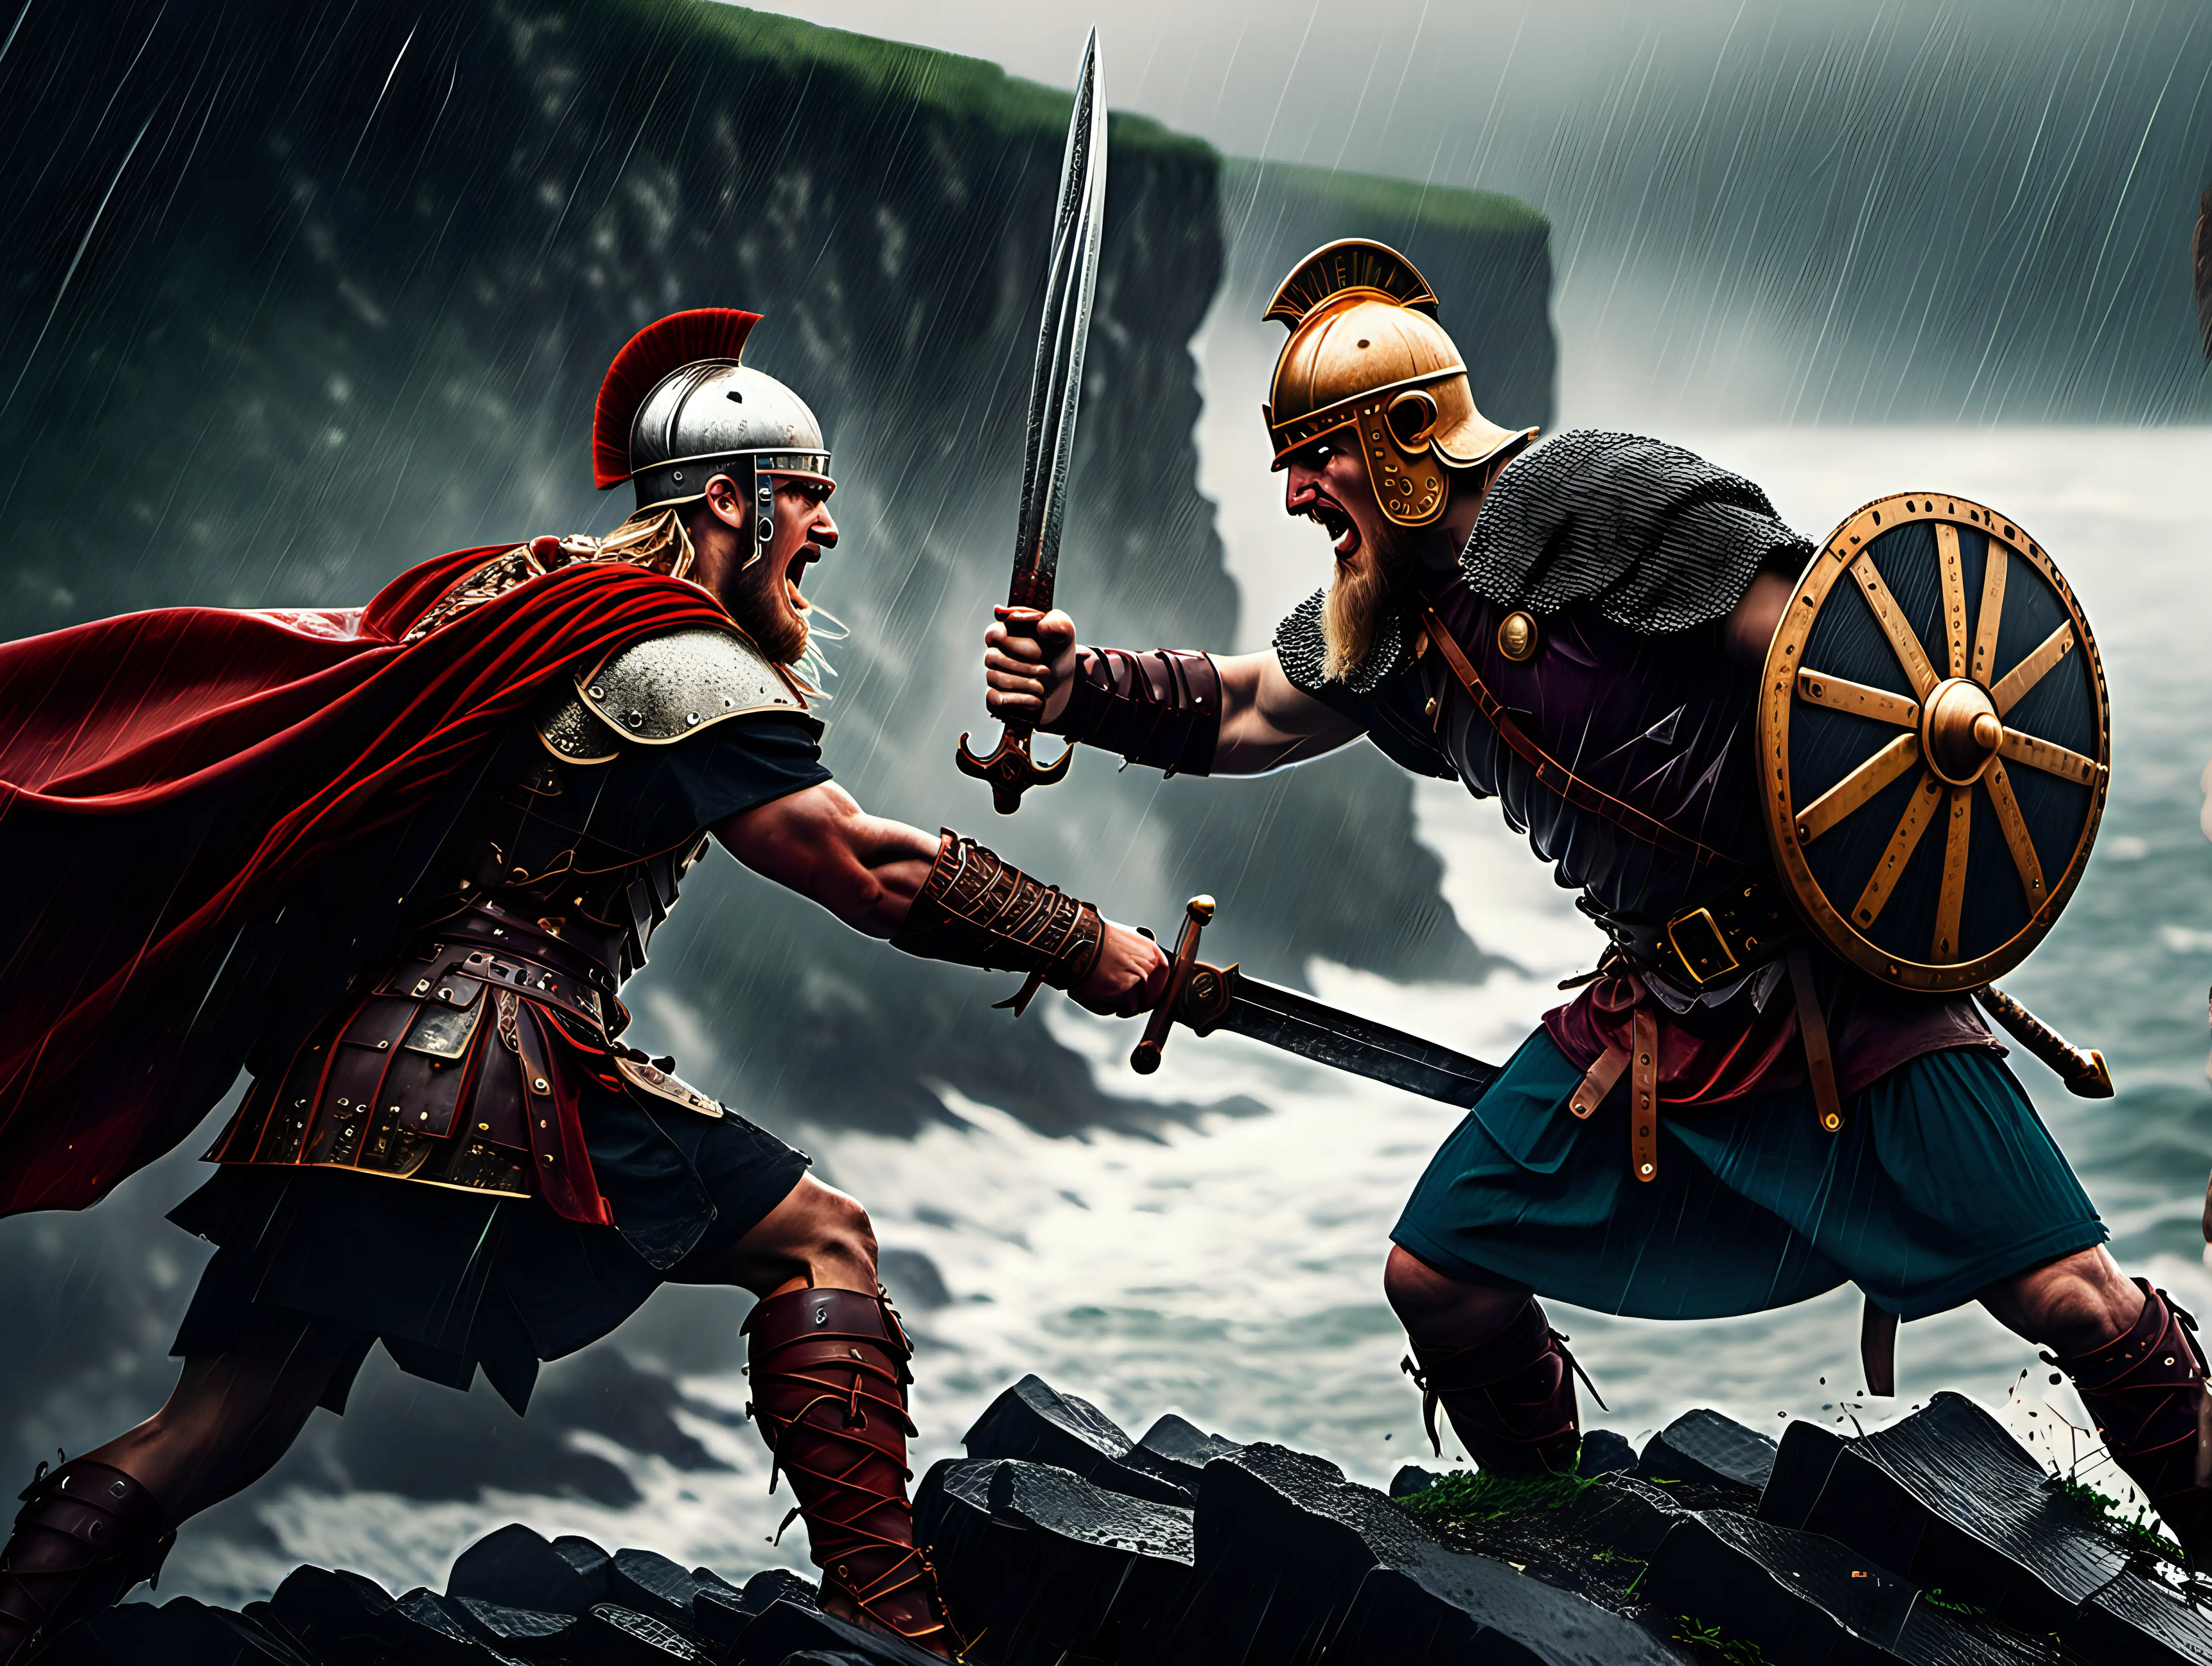 Roman and Viking soldiers fighting each other on a cliff in rain